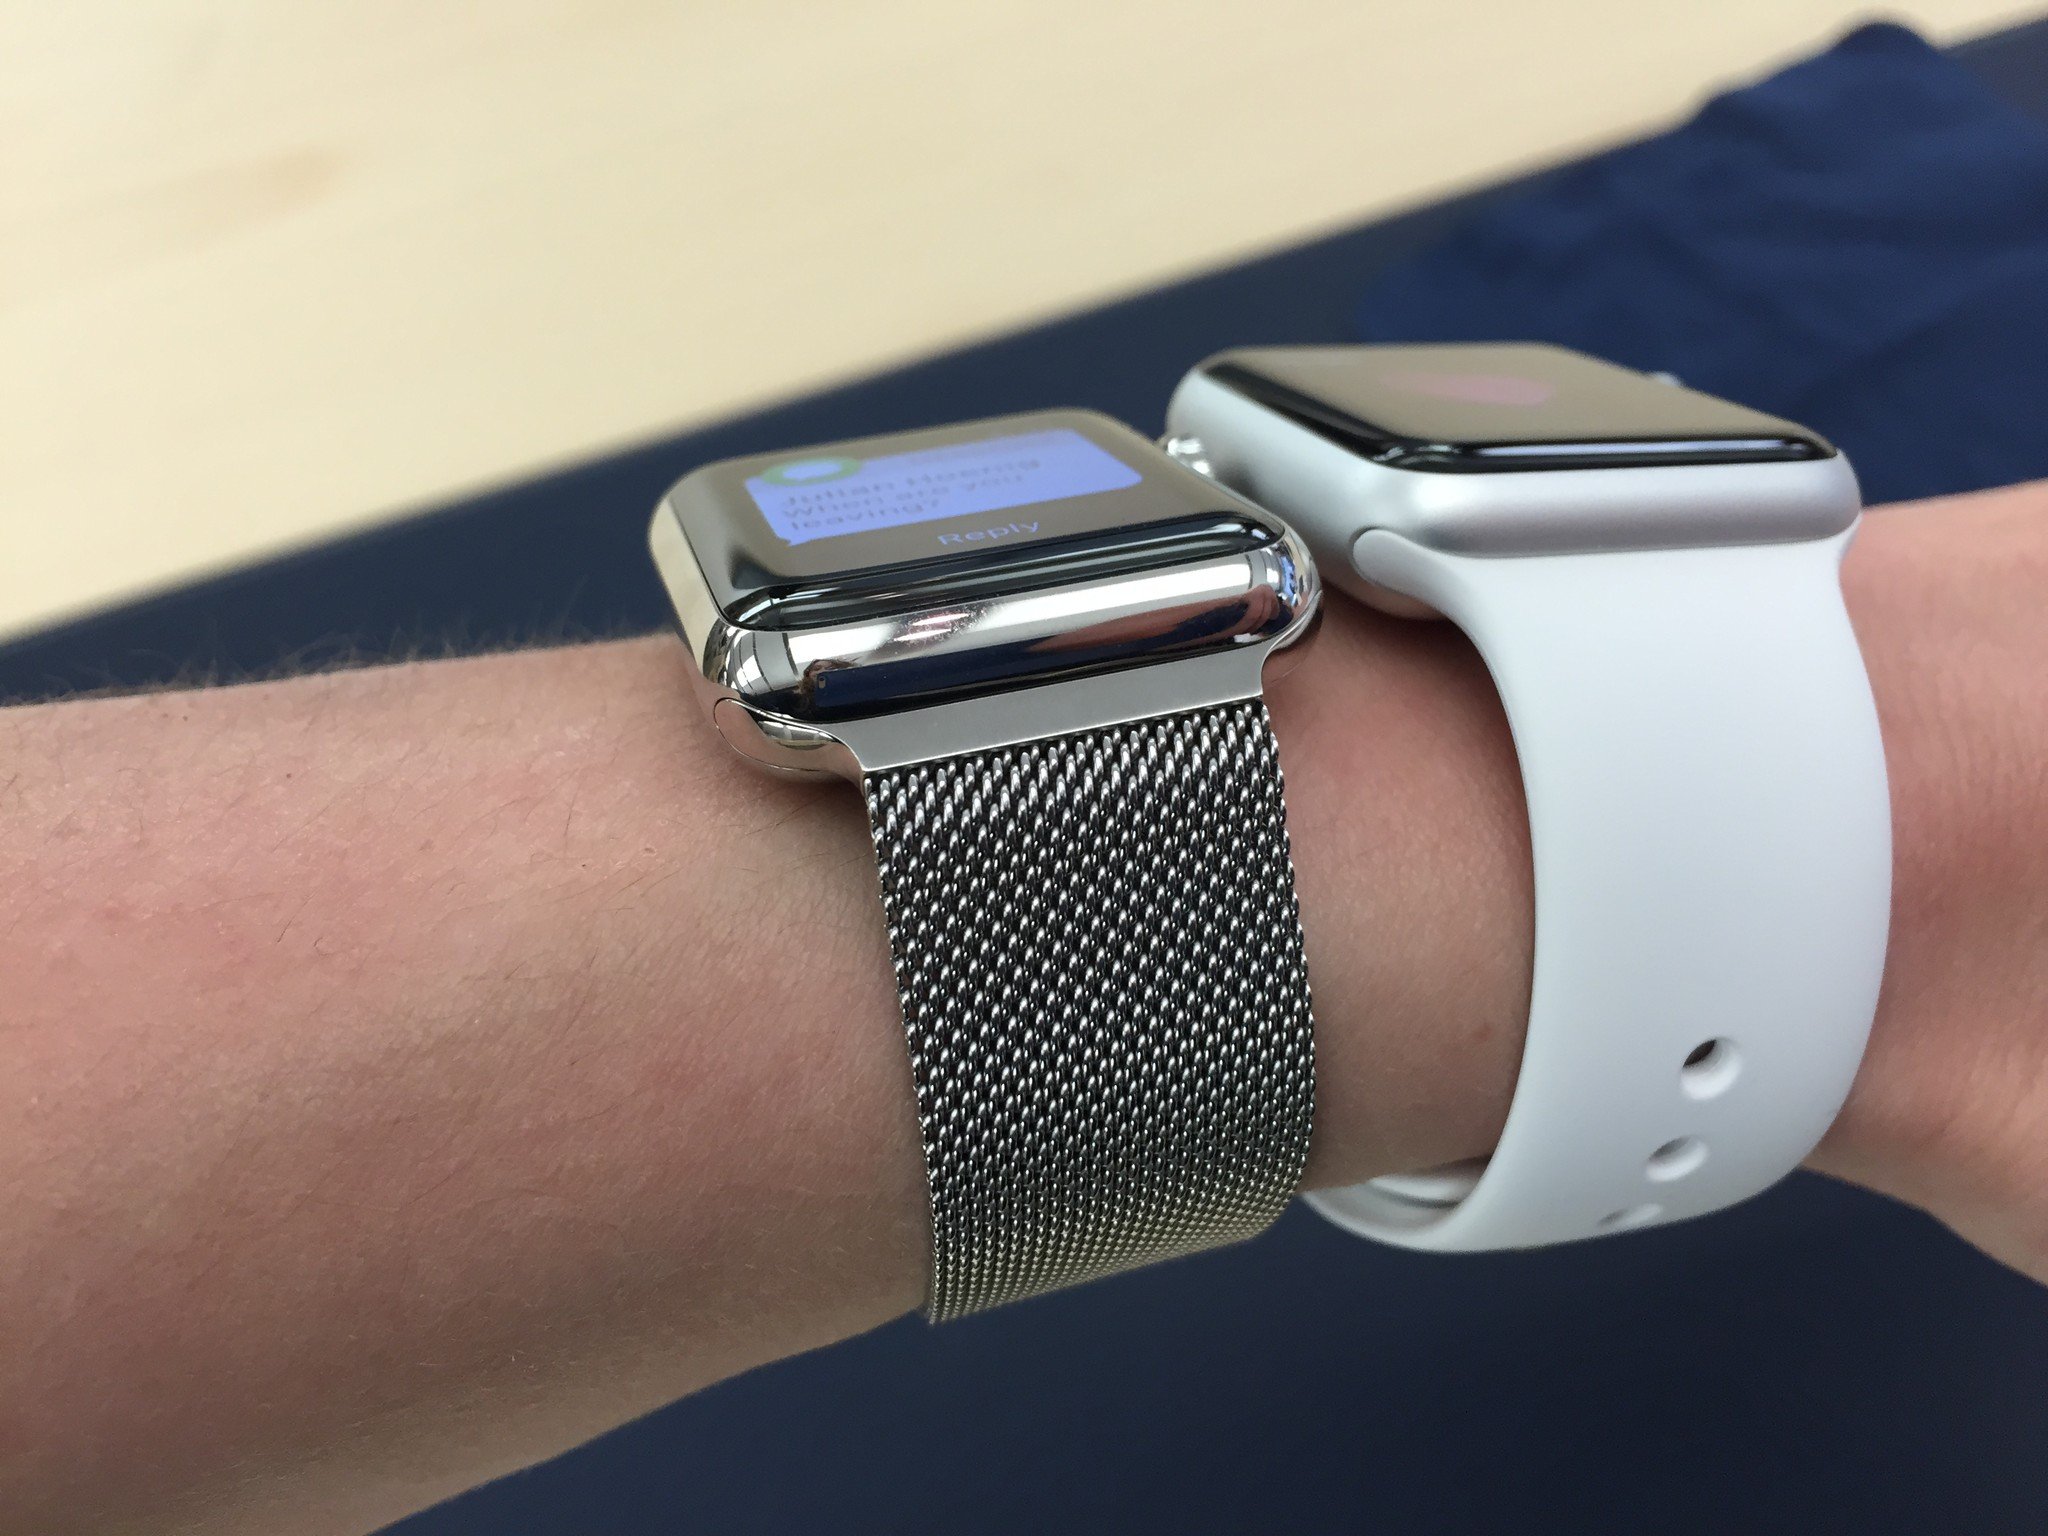 Apple Watch bands and accessibility | iMore Apple Watch Stainless Steel Vs Aluminium